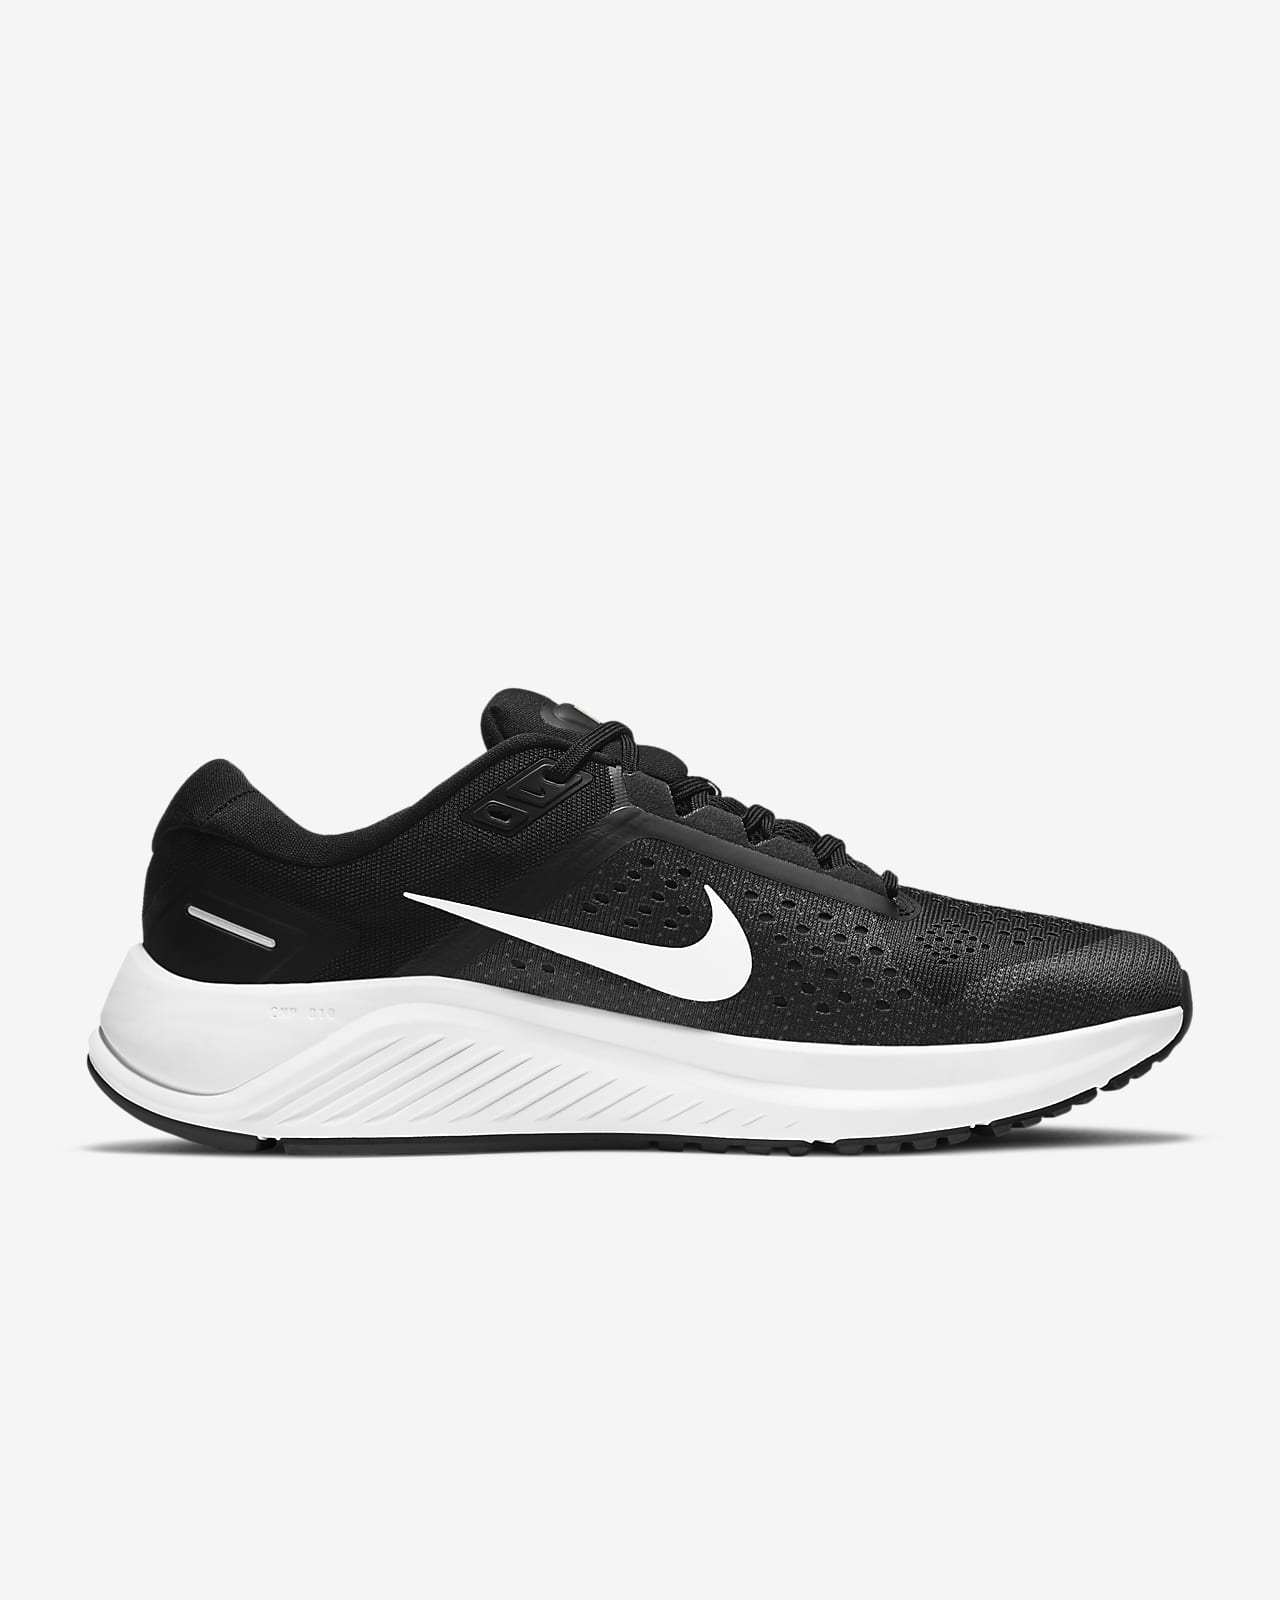 Chaussure de running Nike Air Zoom Structure 23 pour Homme